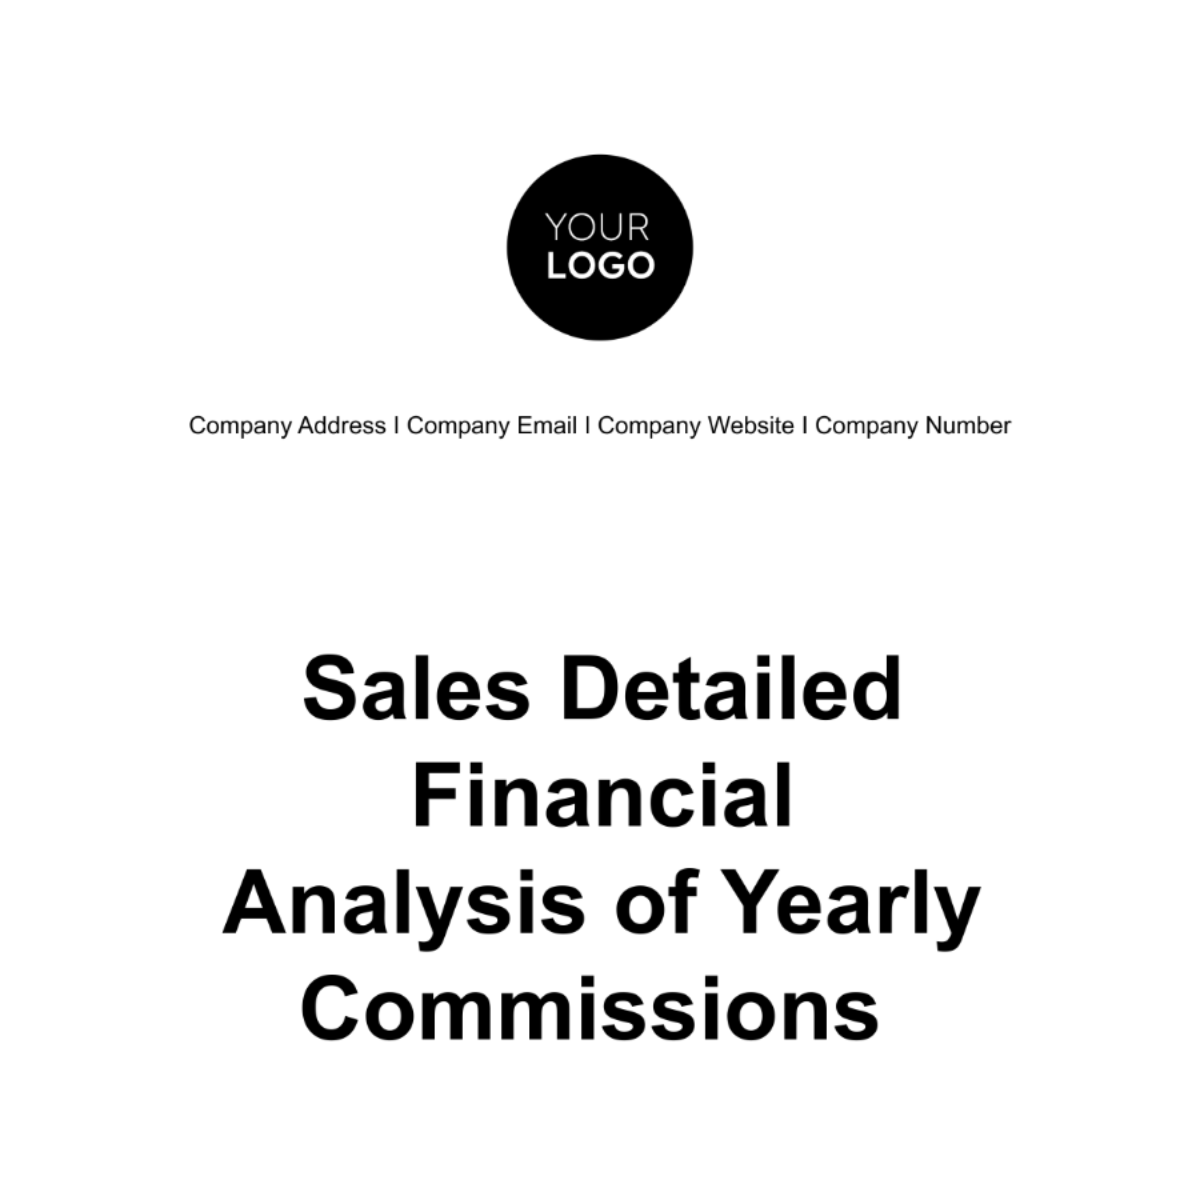 Free Sales Detailed Financial Analysis of Yearly Commissions Template